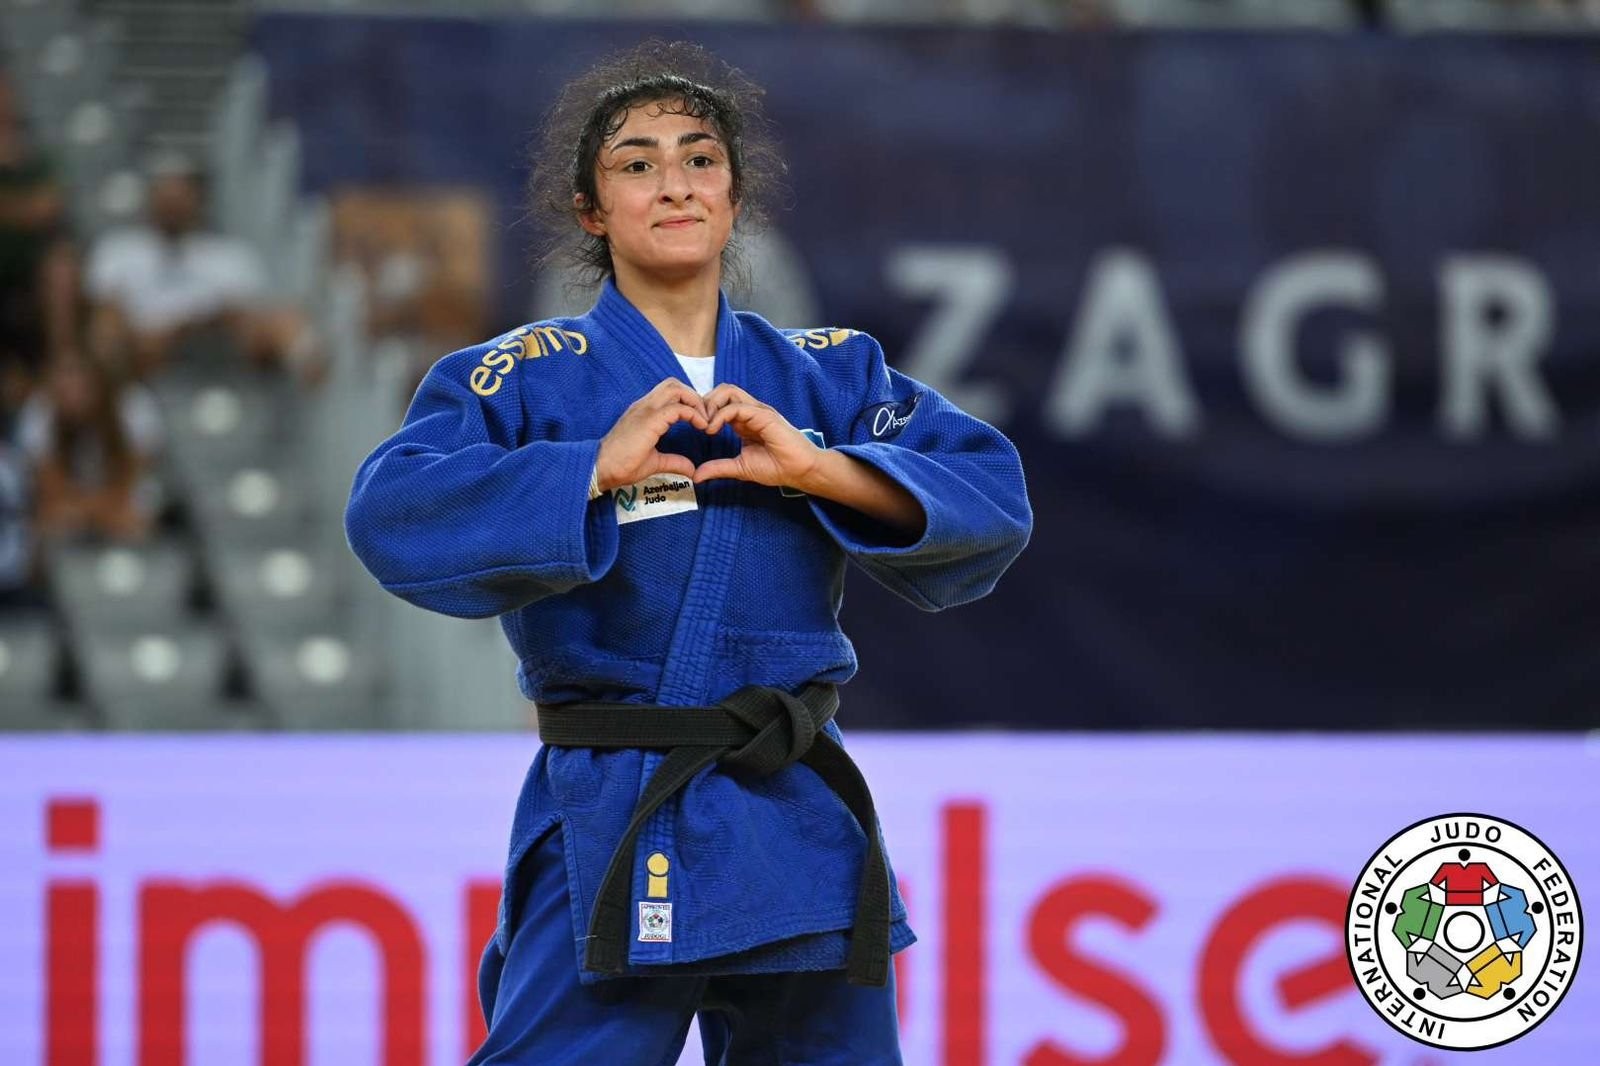 Azerbaijan made it to final in the World Championship